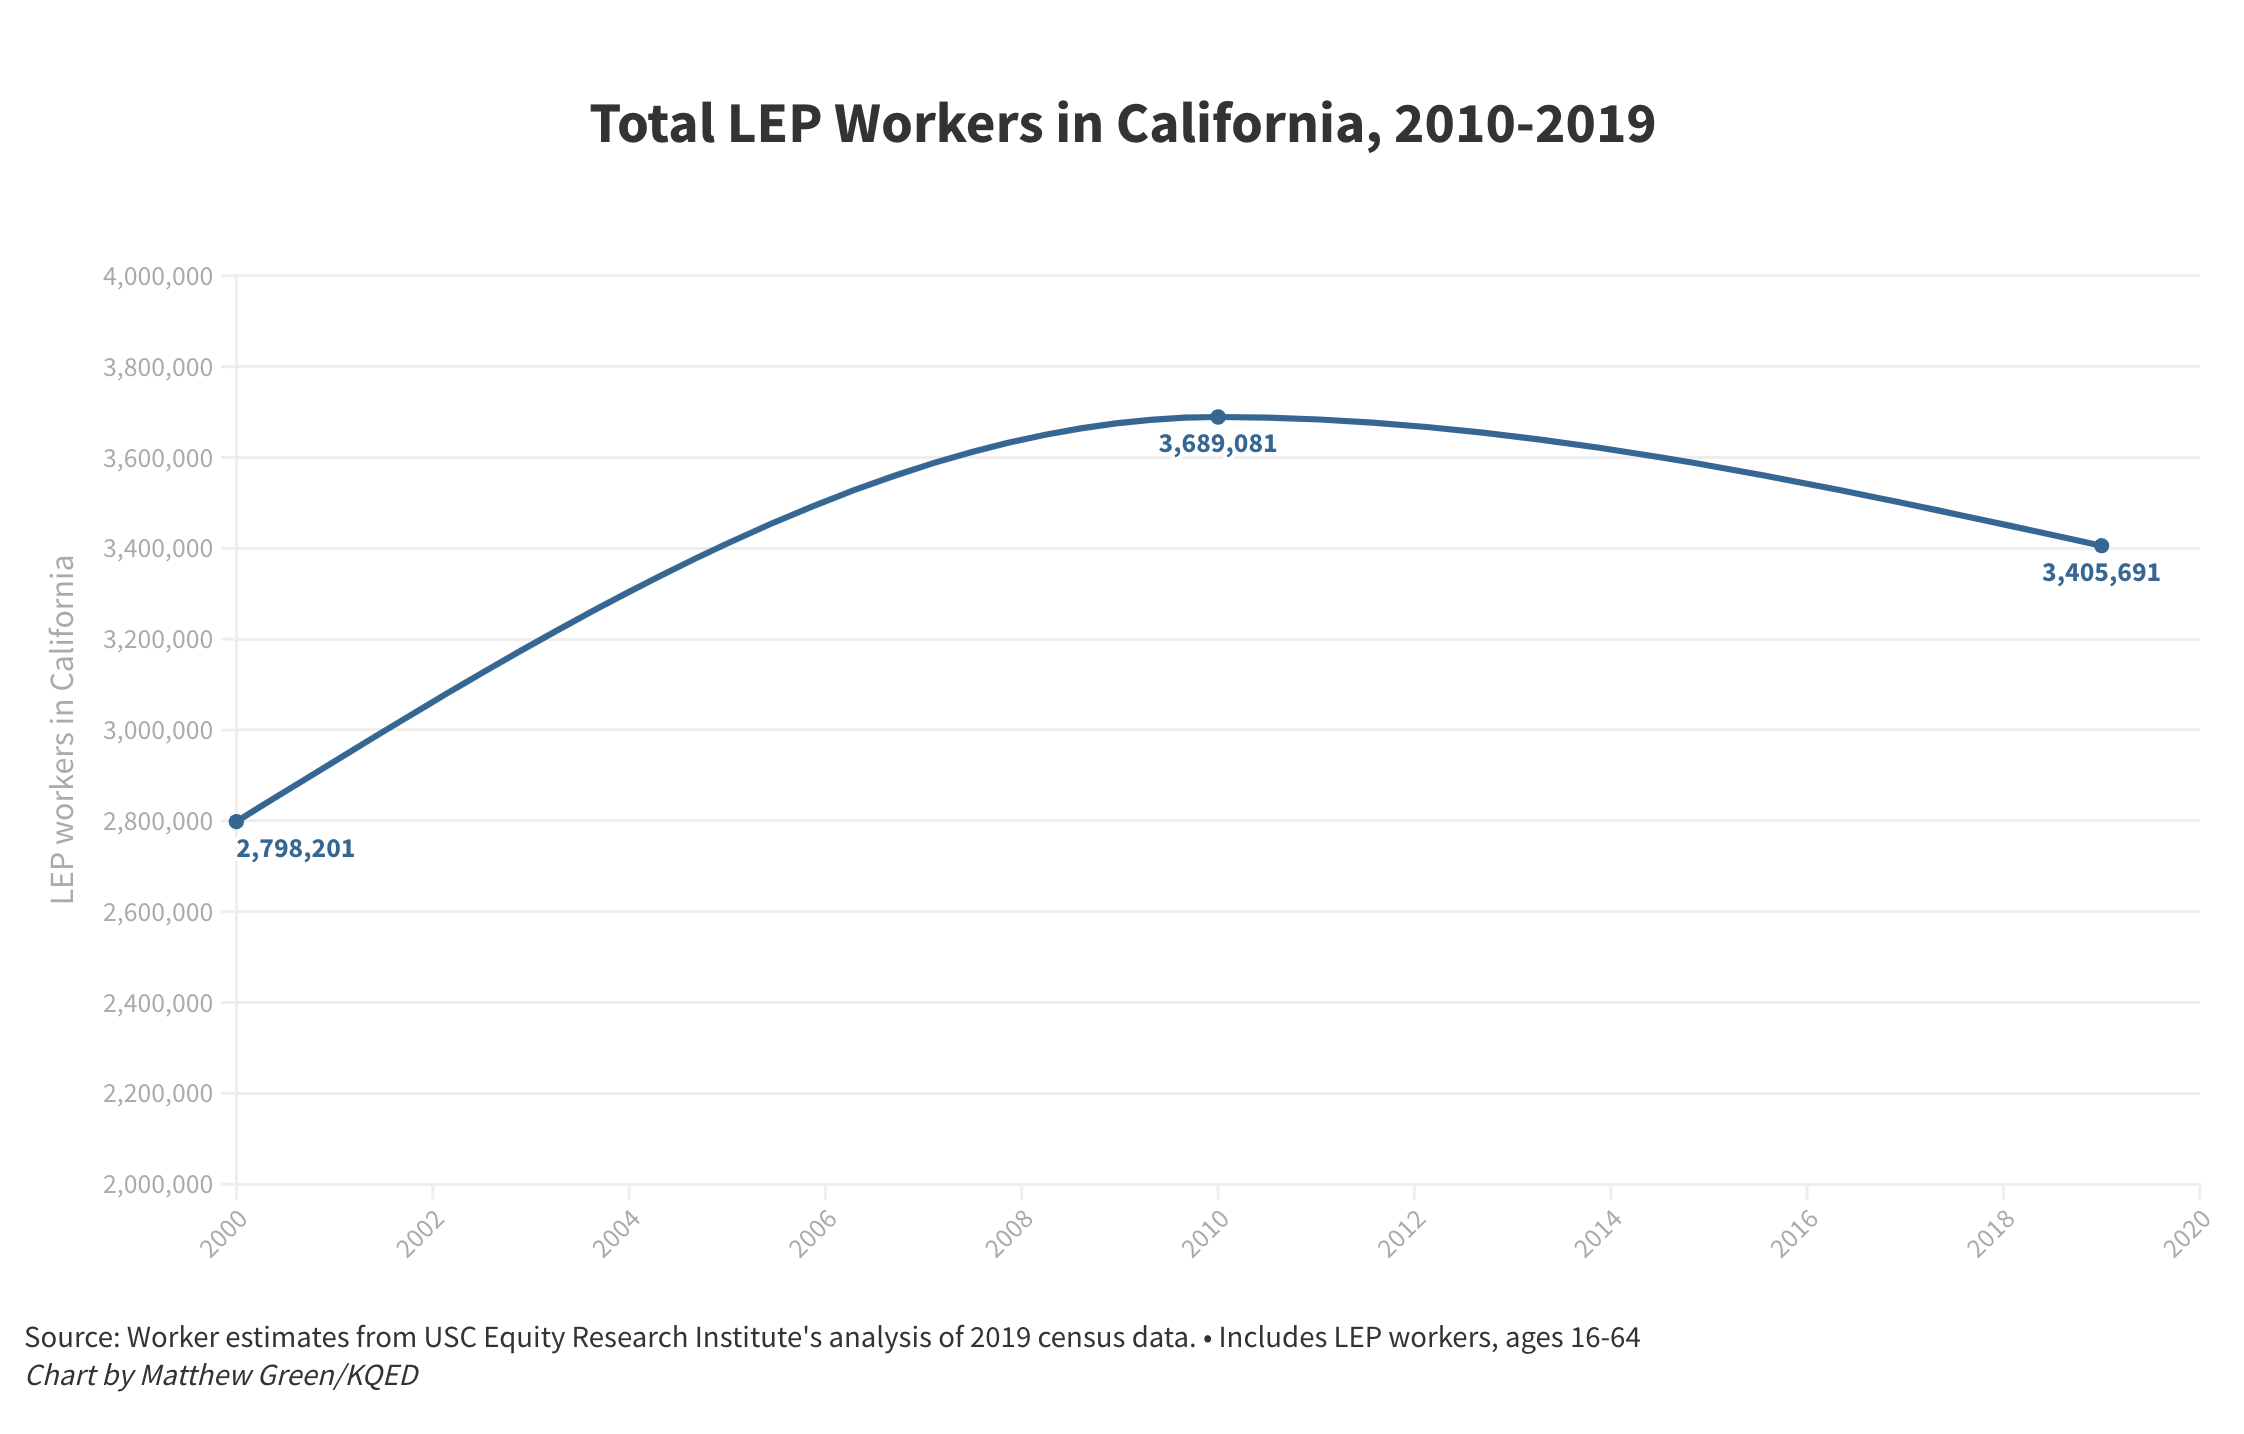 A line chart showing the estimated total number of LEP workers in California, 2010-2019